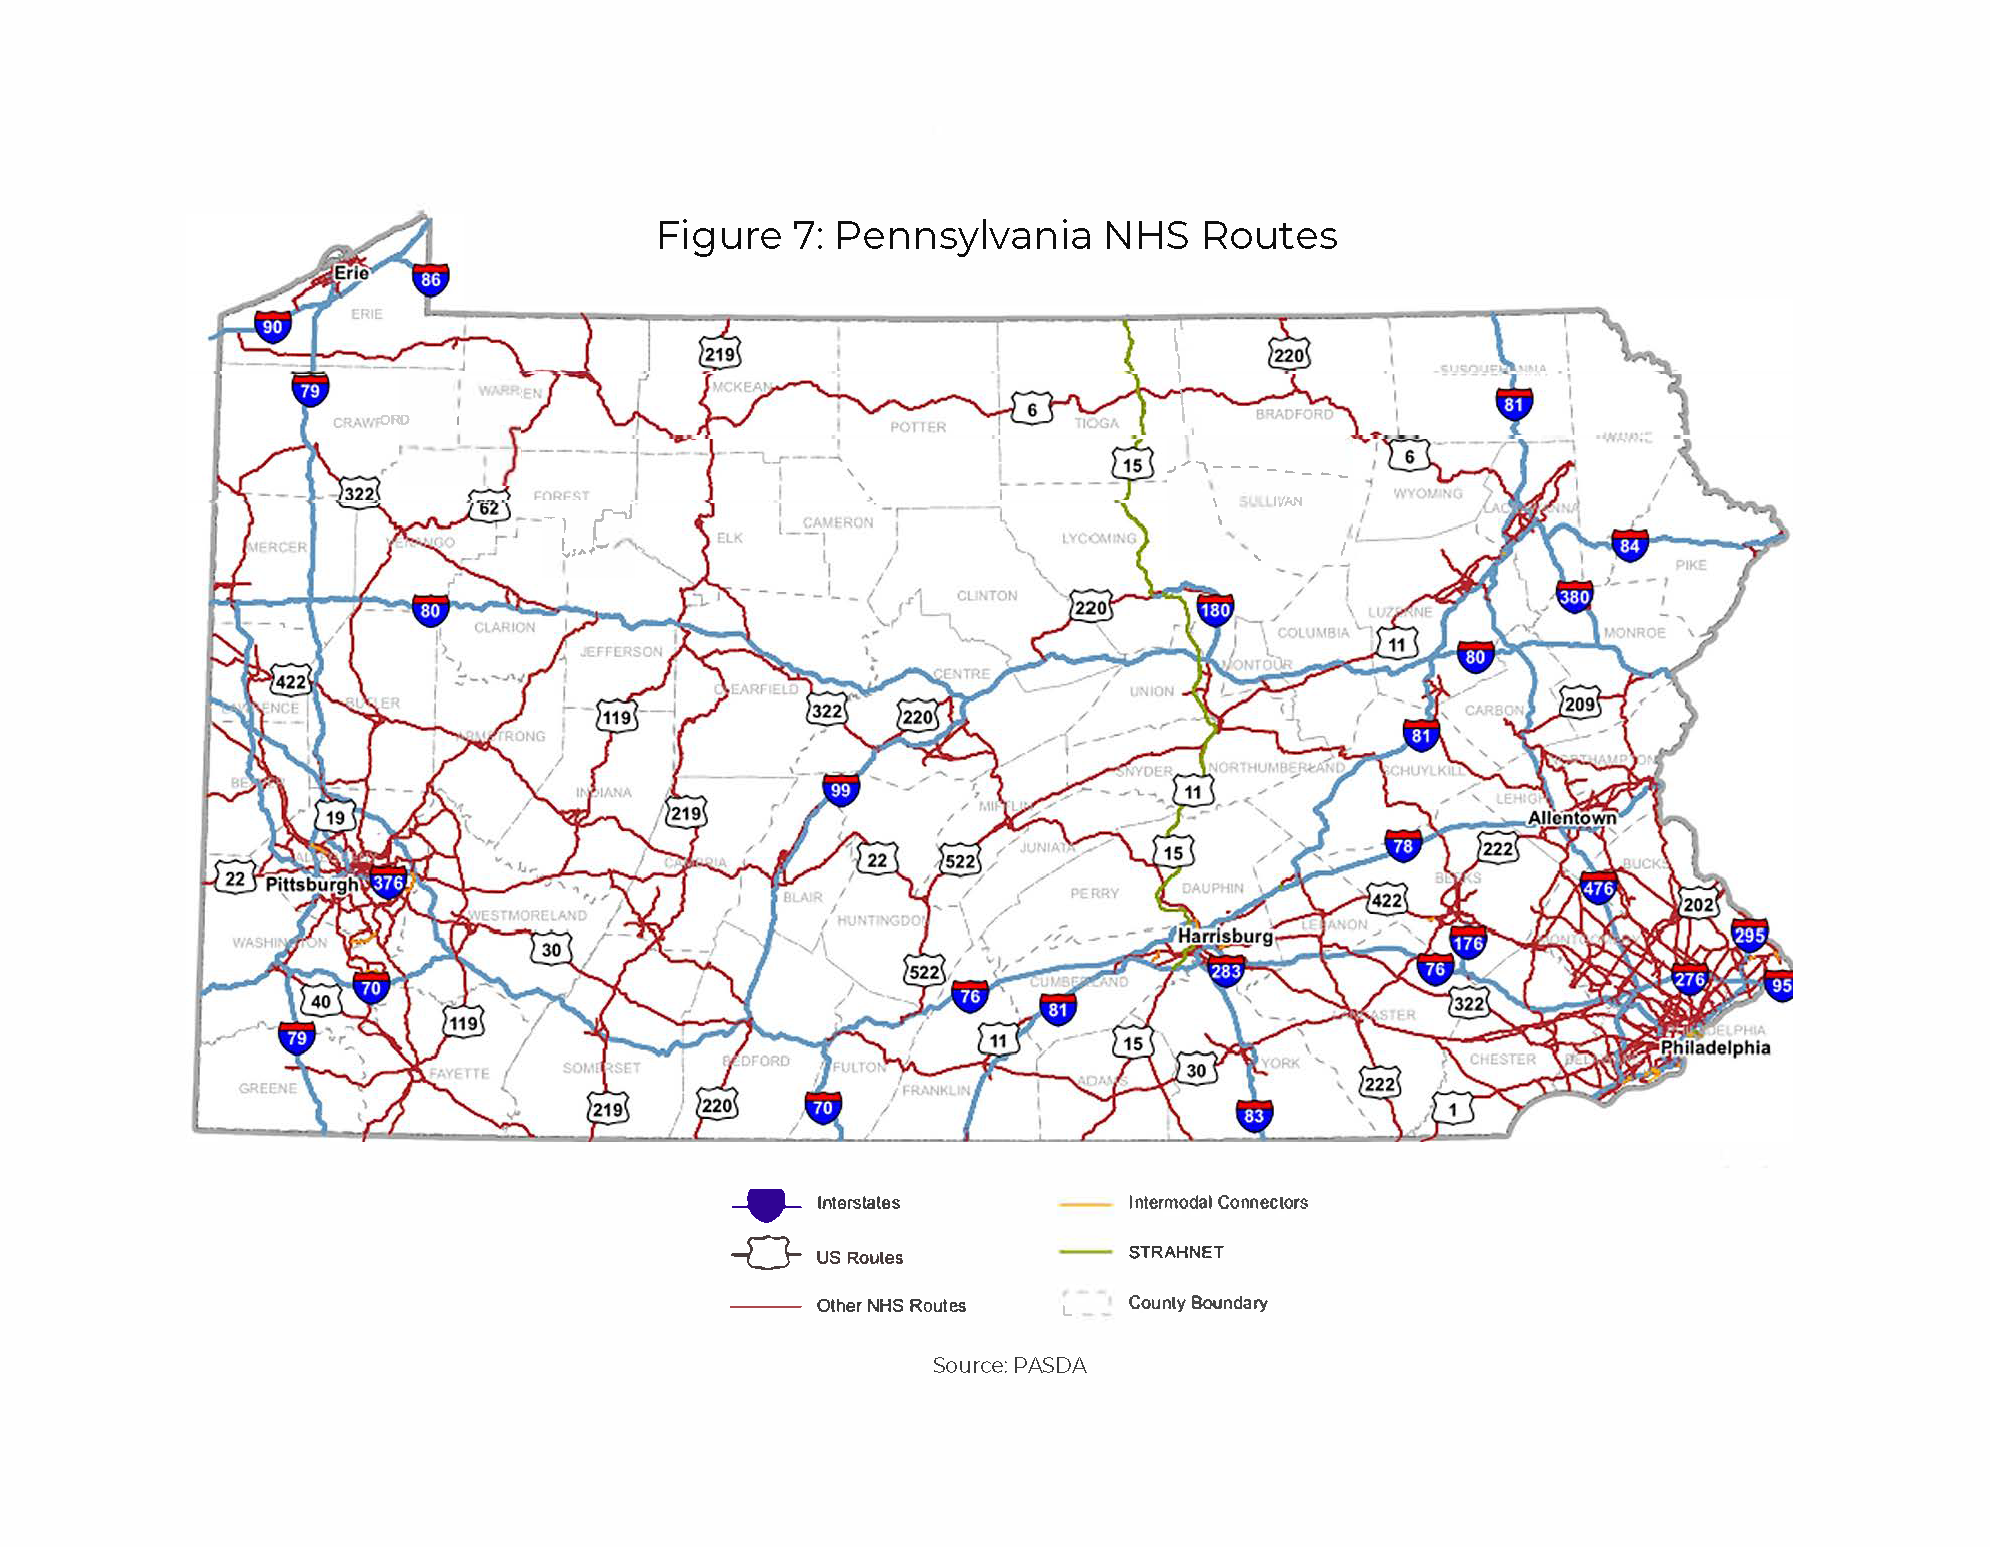 Figure 7 is a PASDA state map of Pennsylvania illustrating the National Highway System Routes, Interstates, US Routes, and county boundaries.